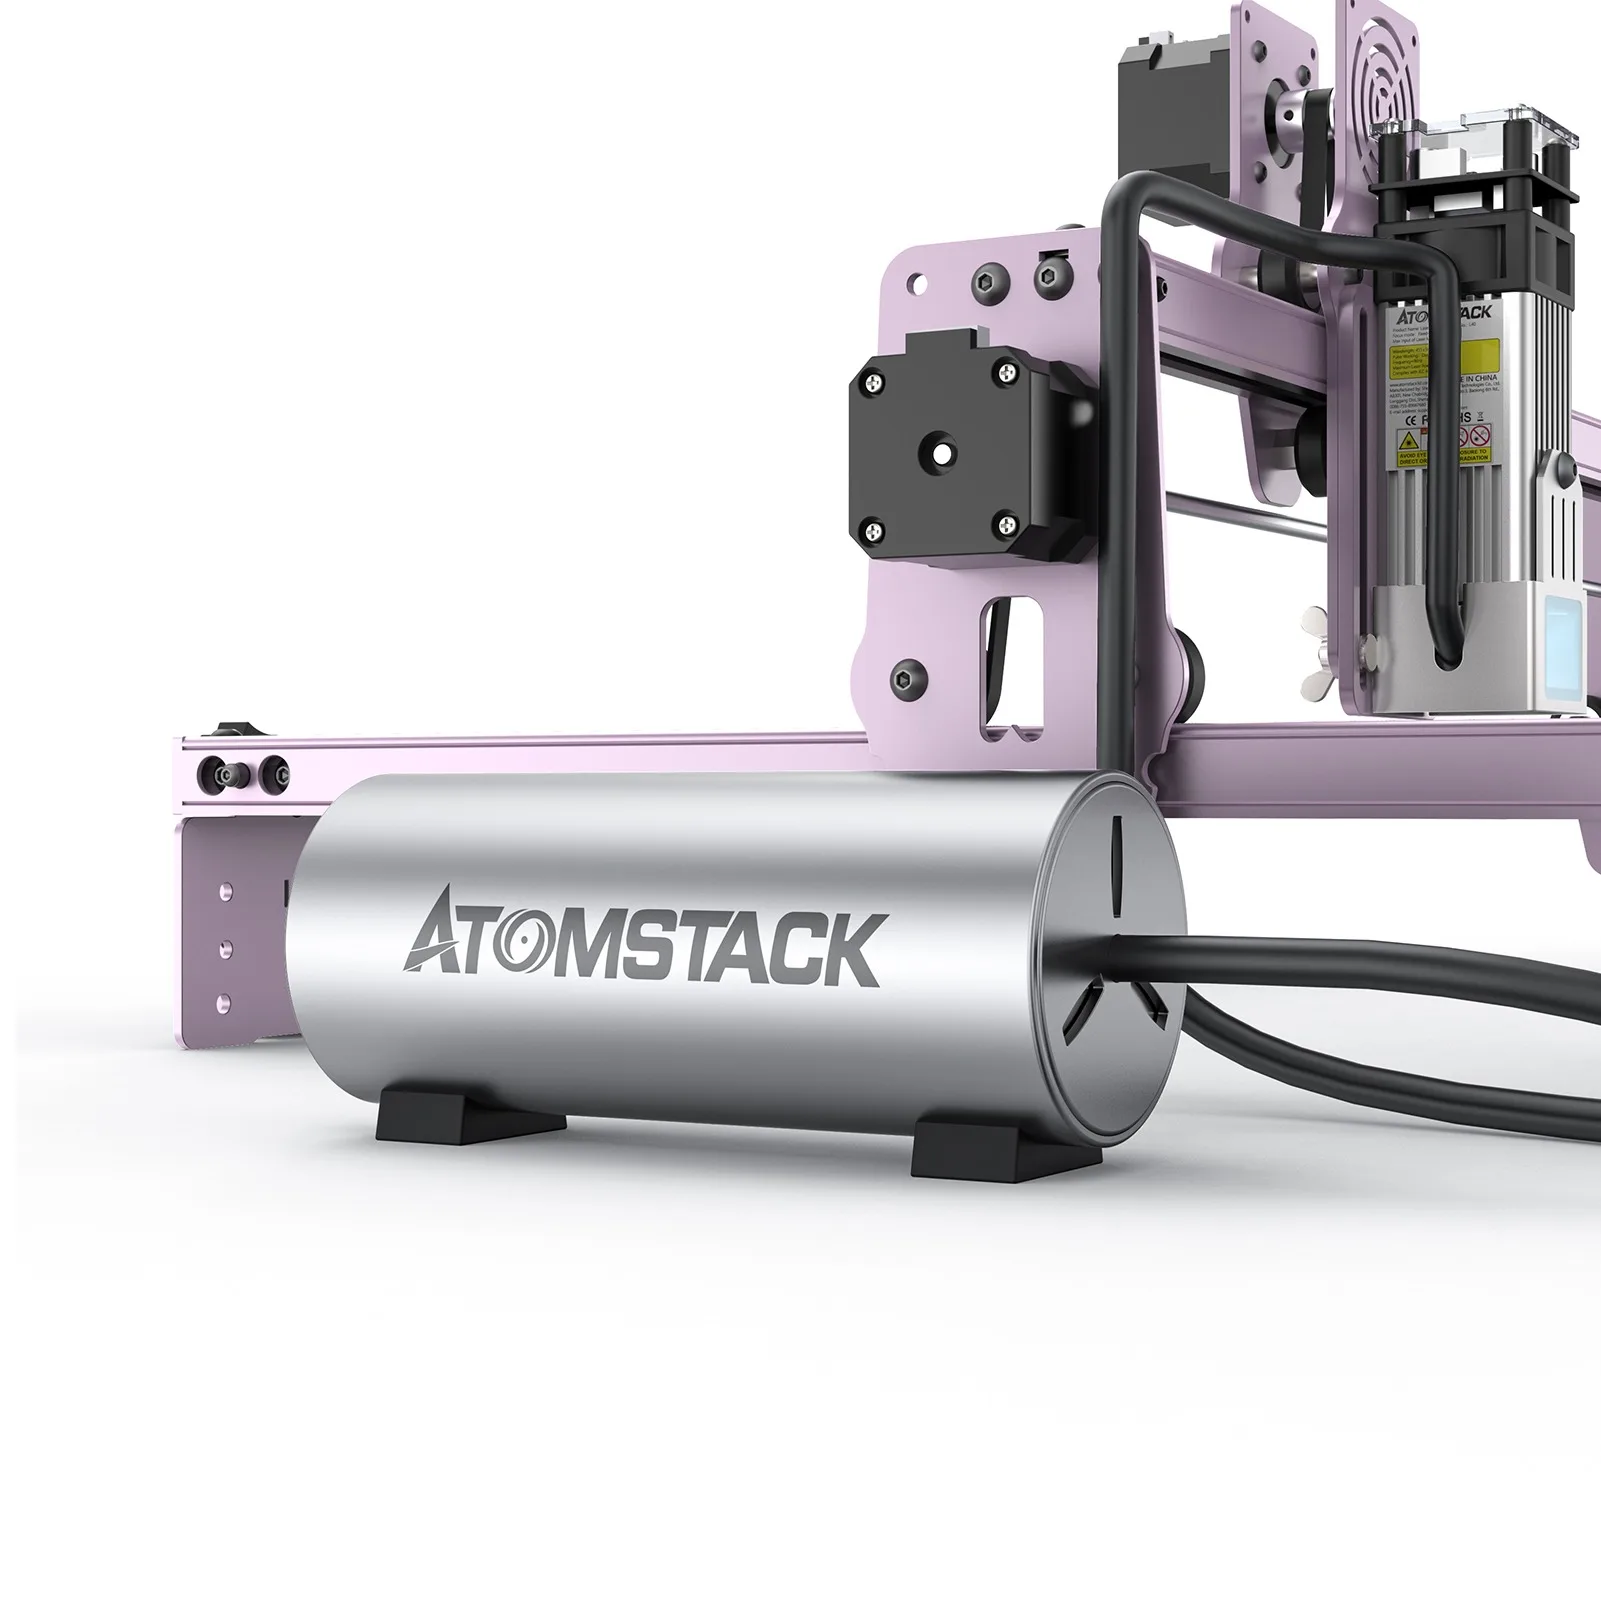 ATOMSTACK Laser Cutting/Engraving Air-Assisted Accessories HIgh Airflow 10-30L/min Adjustable to Remove Smoke and Dust enlarge